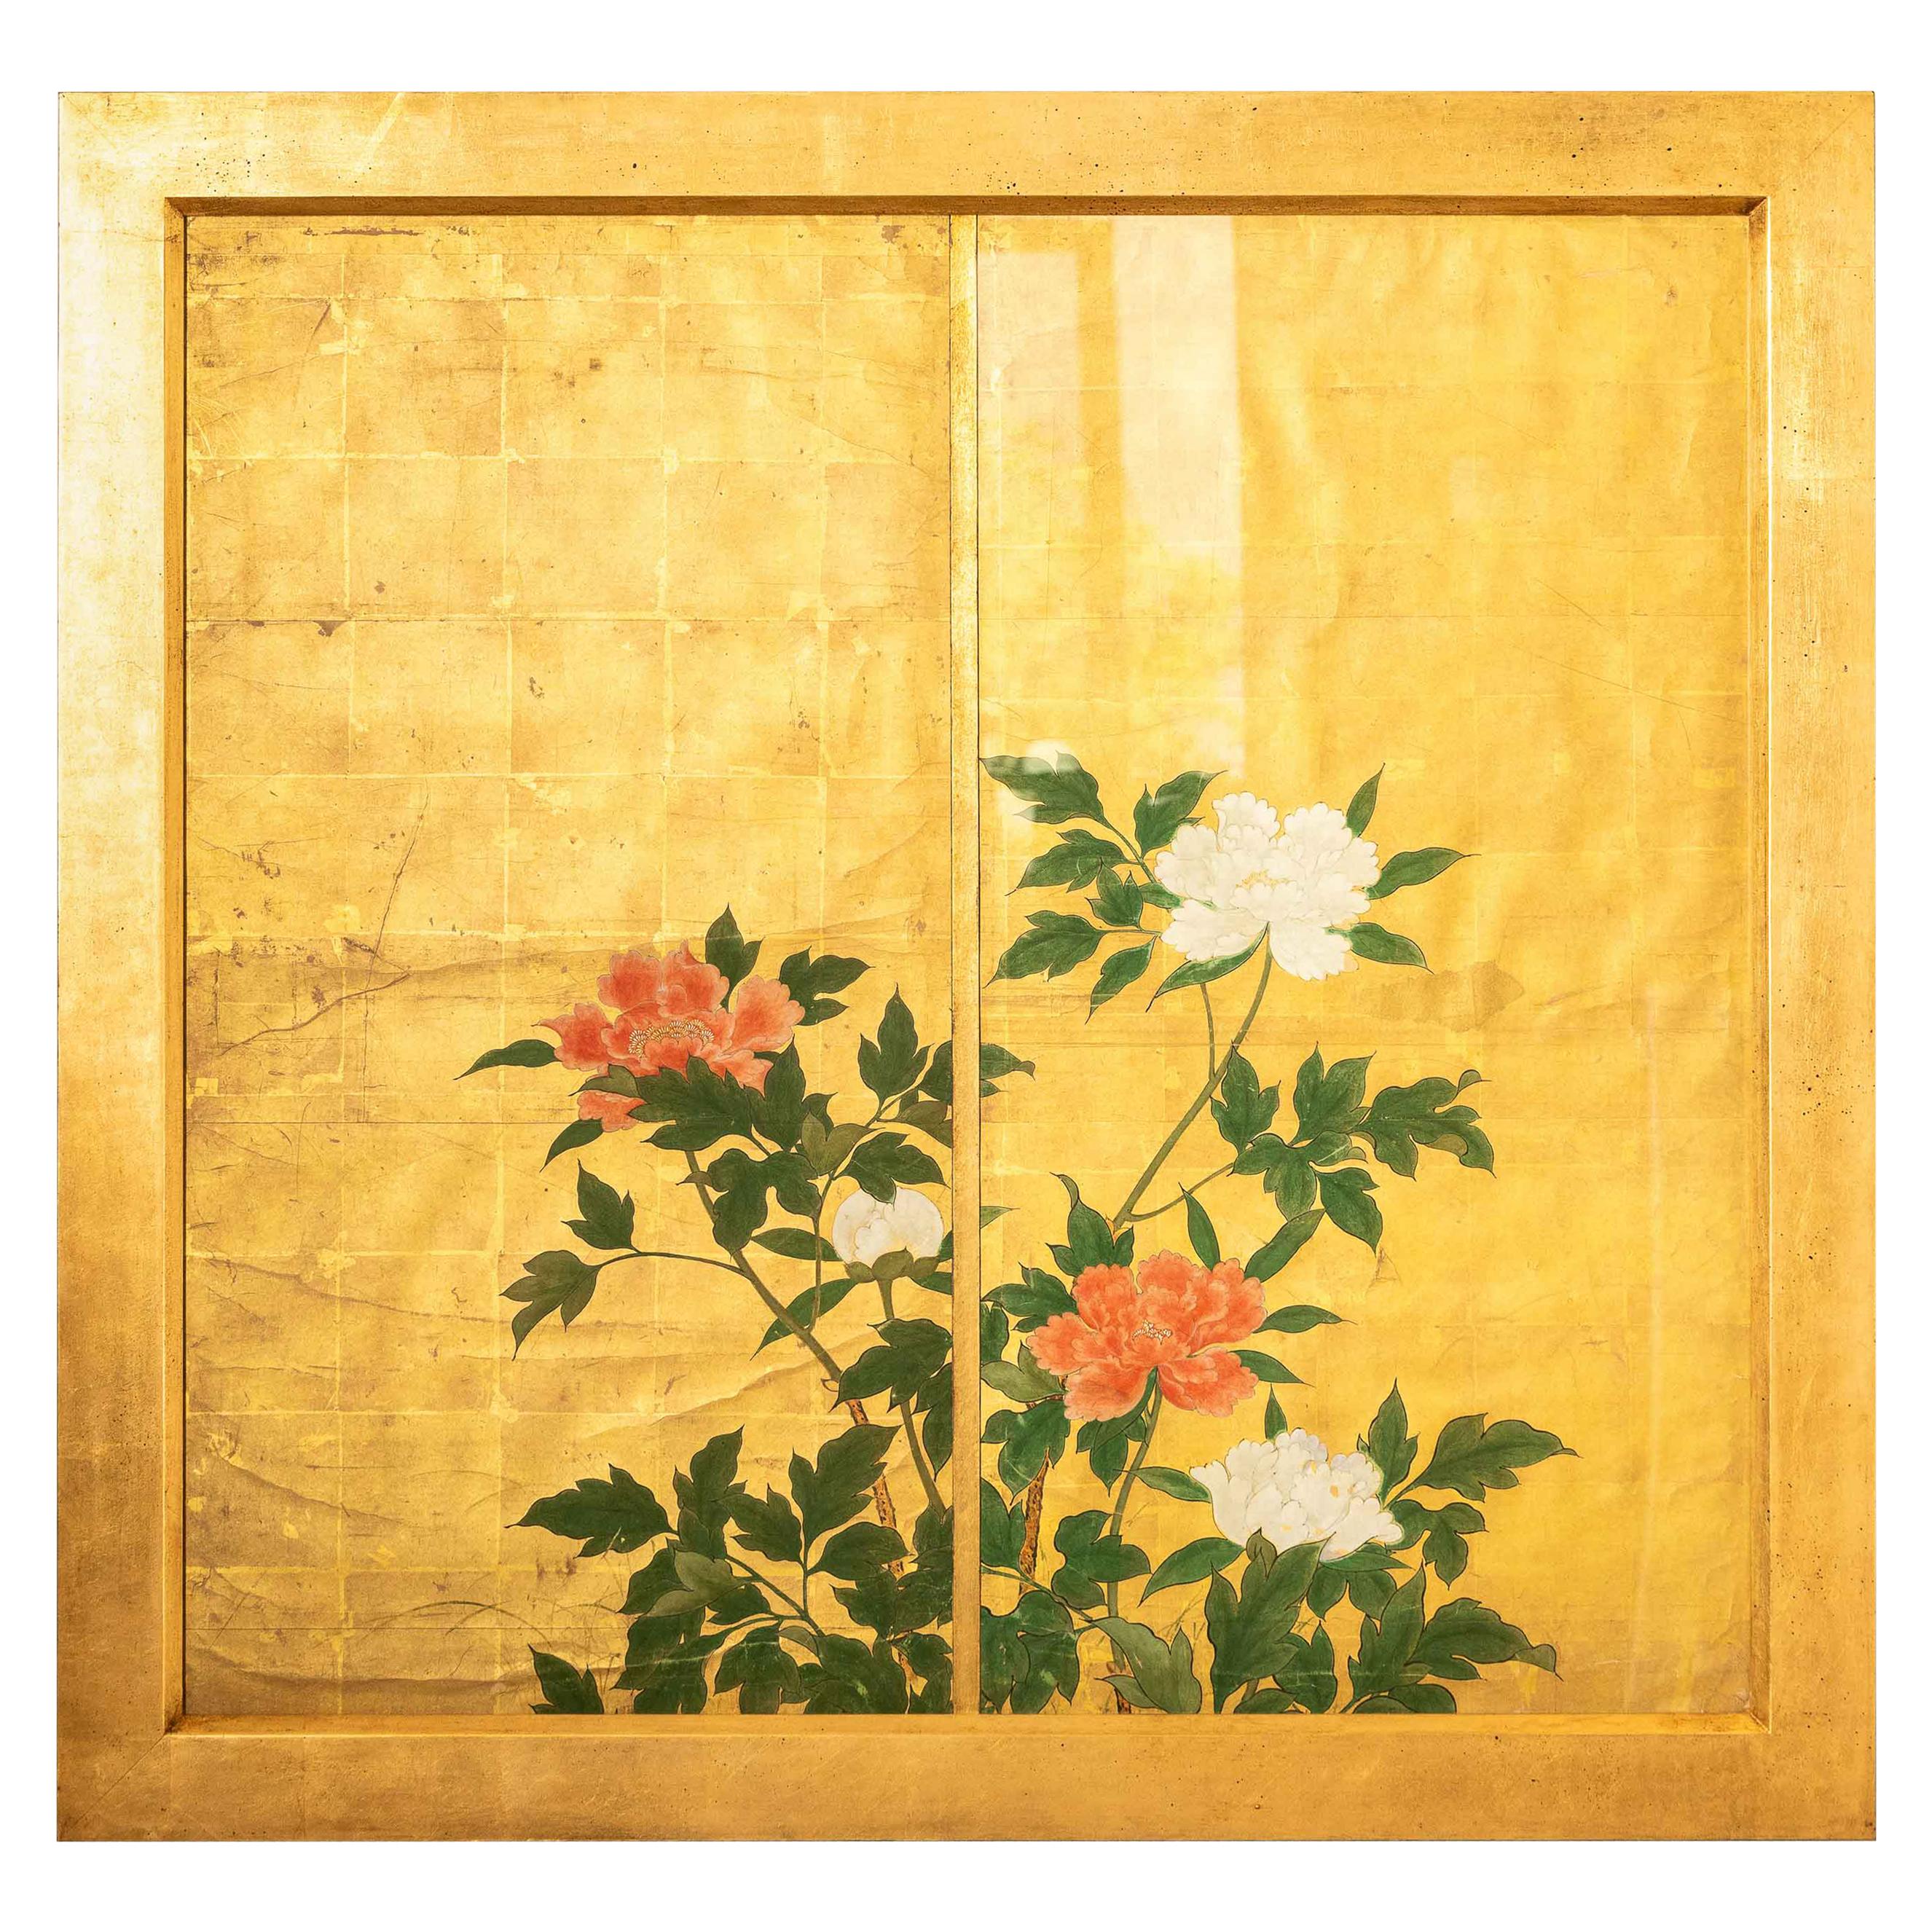 18th Century Japanese Painting of Red and White Peonies on a Gold Leaf Ground